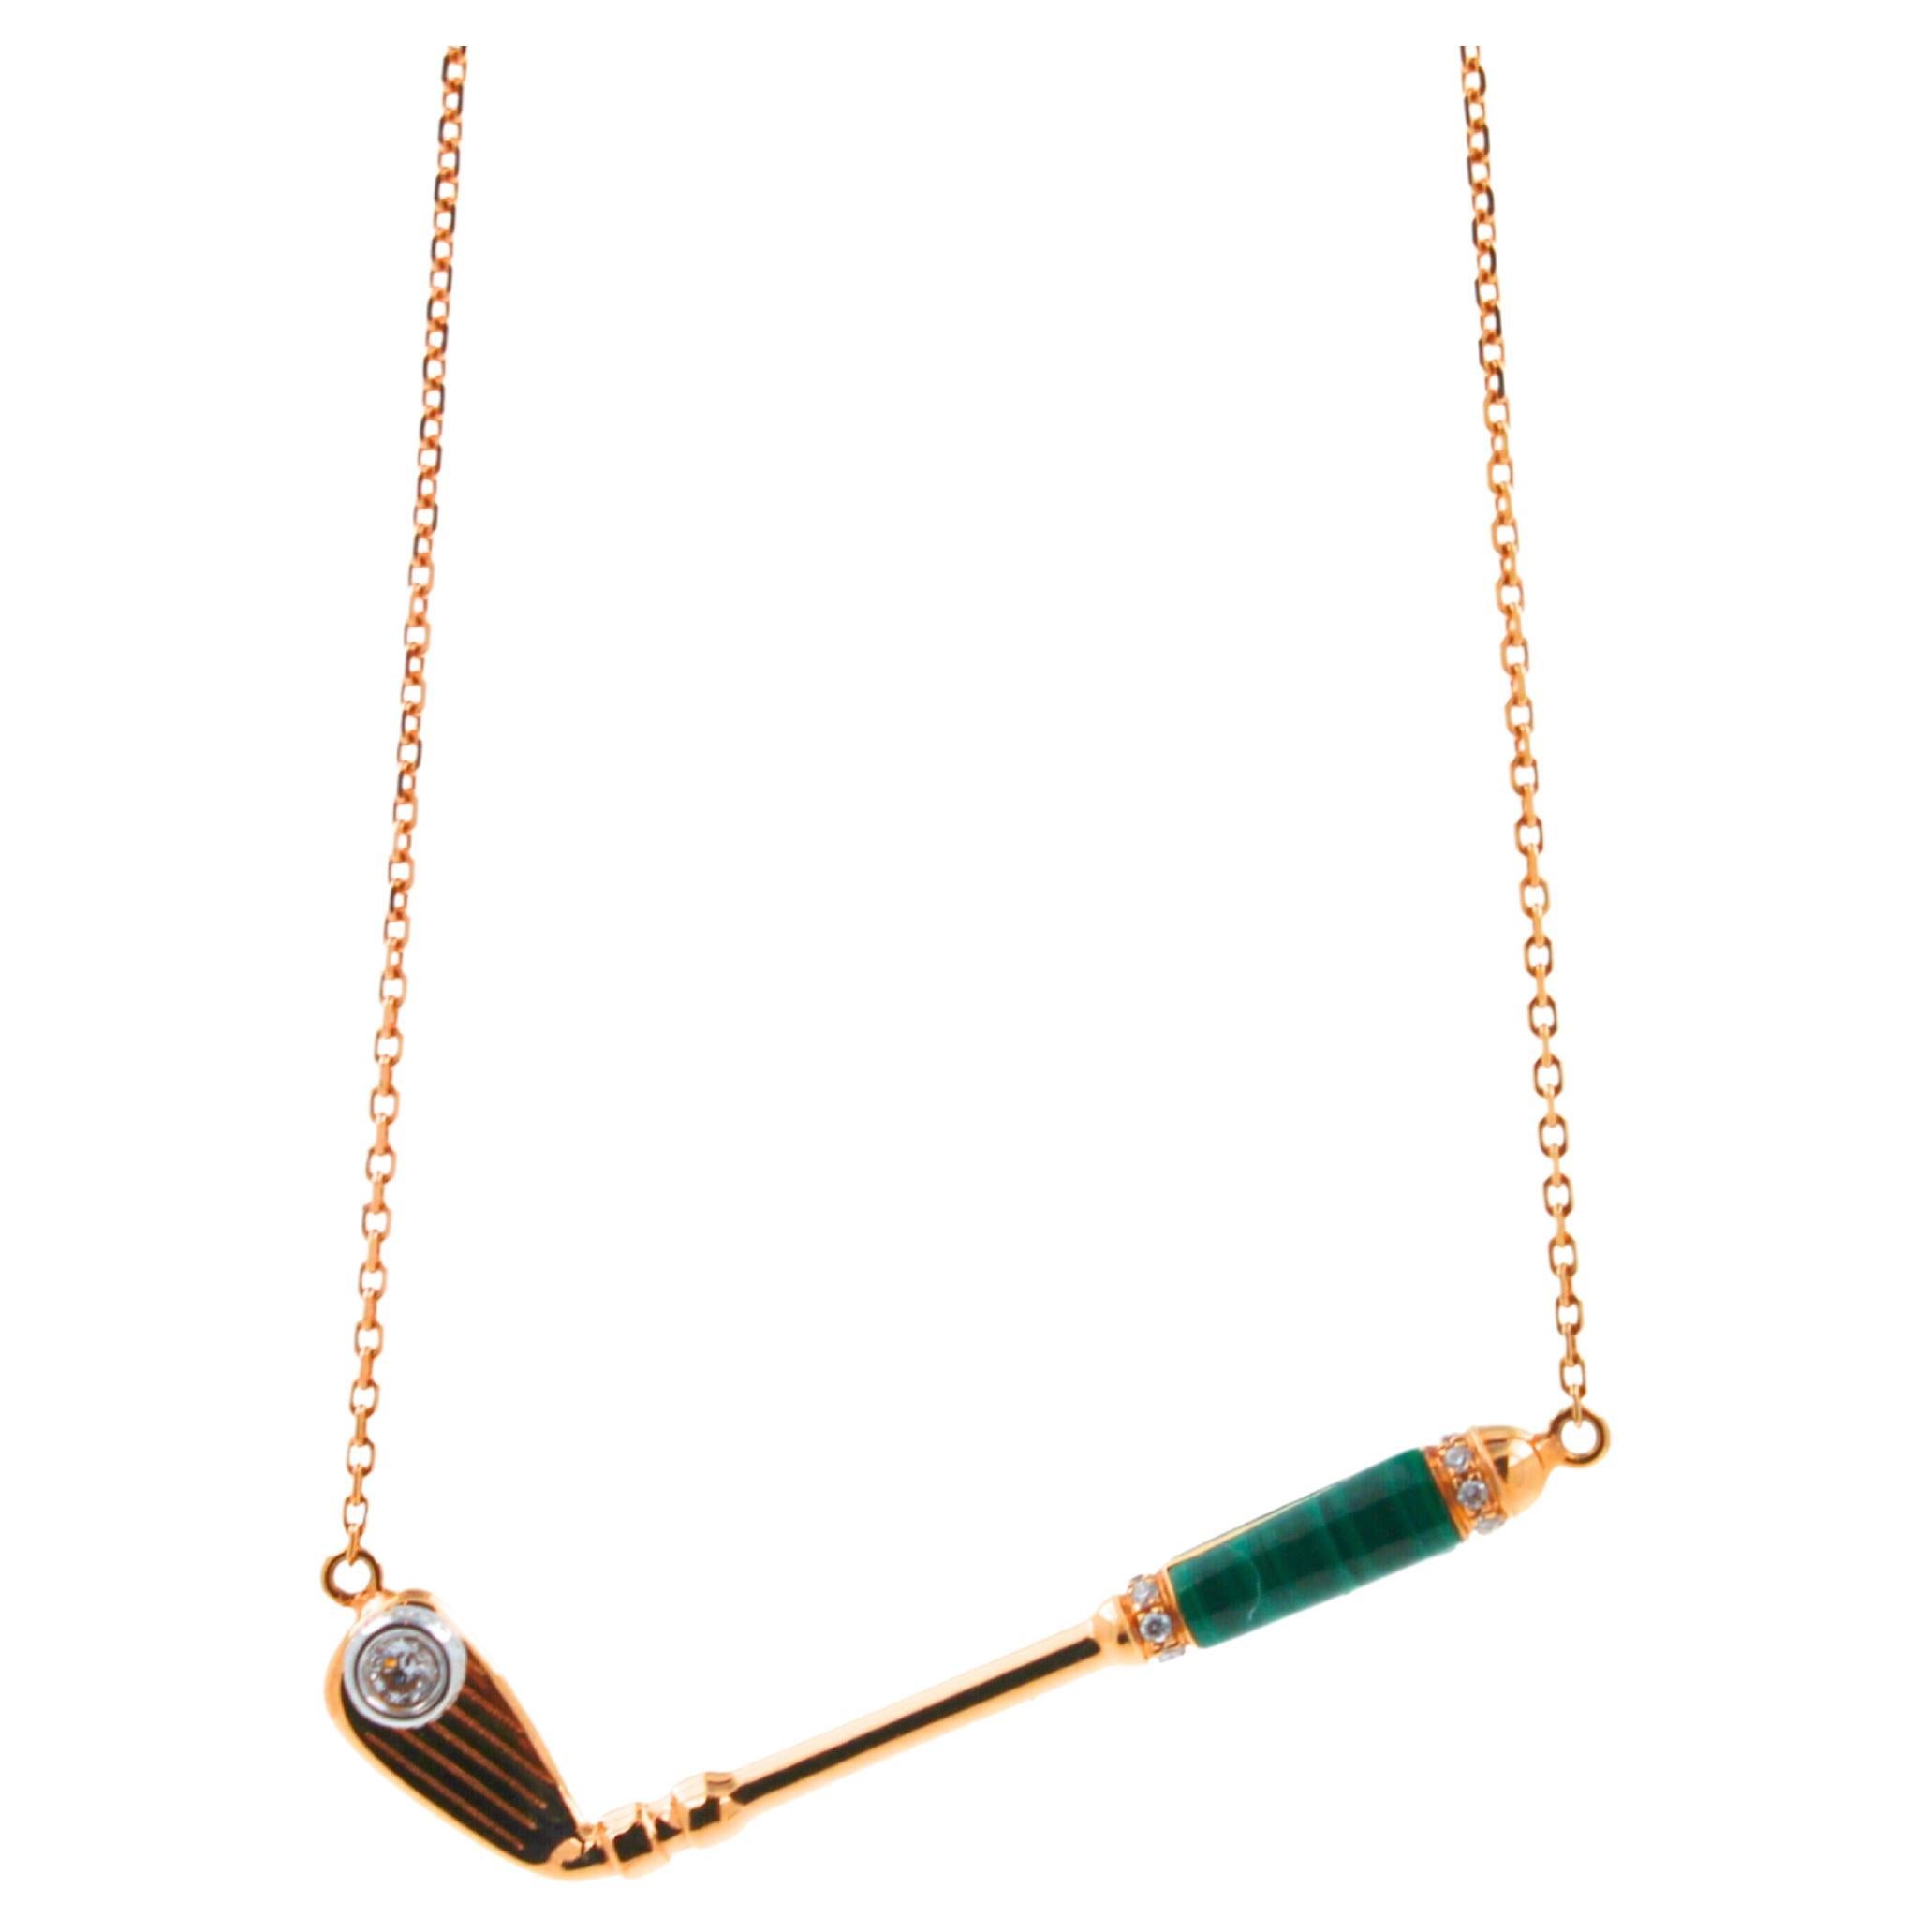 18K Yellow Gold
Green Malachite Gemstone Handle
White Diamond Golf Ball Gemstone
0.15 cts Diamonds
16-18 inches Diamond-Cut Link Cable chain length
In-Stock
This is part of Galt & Bro. Jewelry's exclusive, custom made-to-order Golf Club Birdies